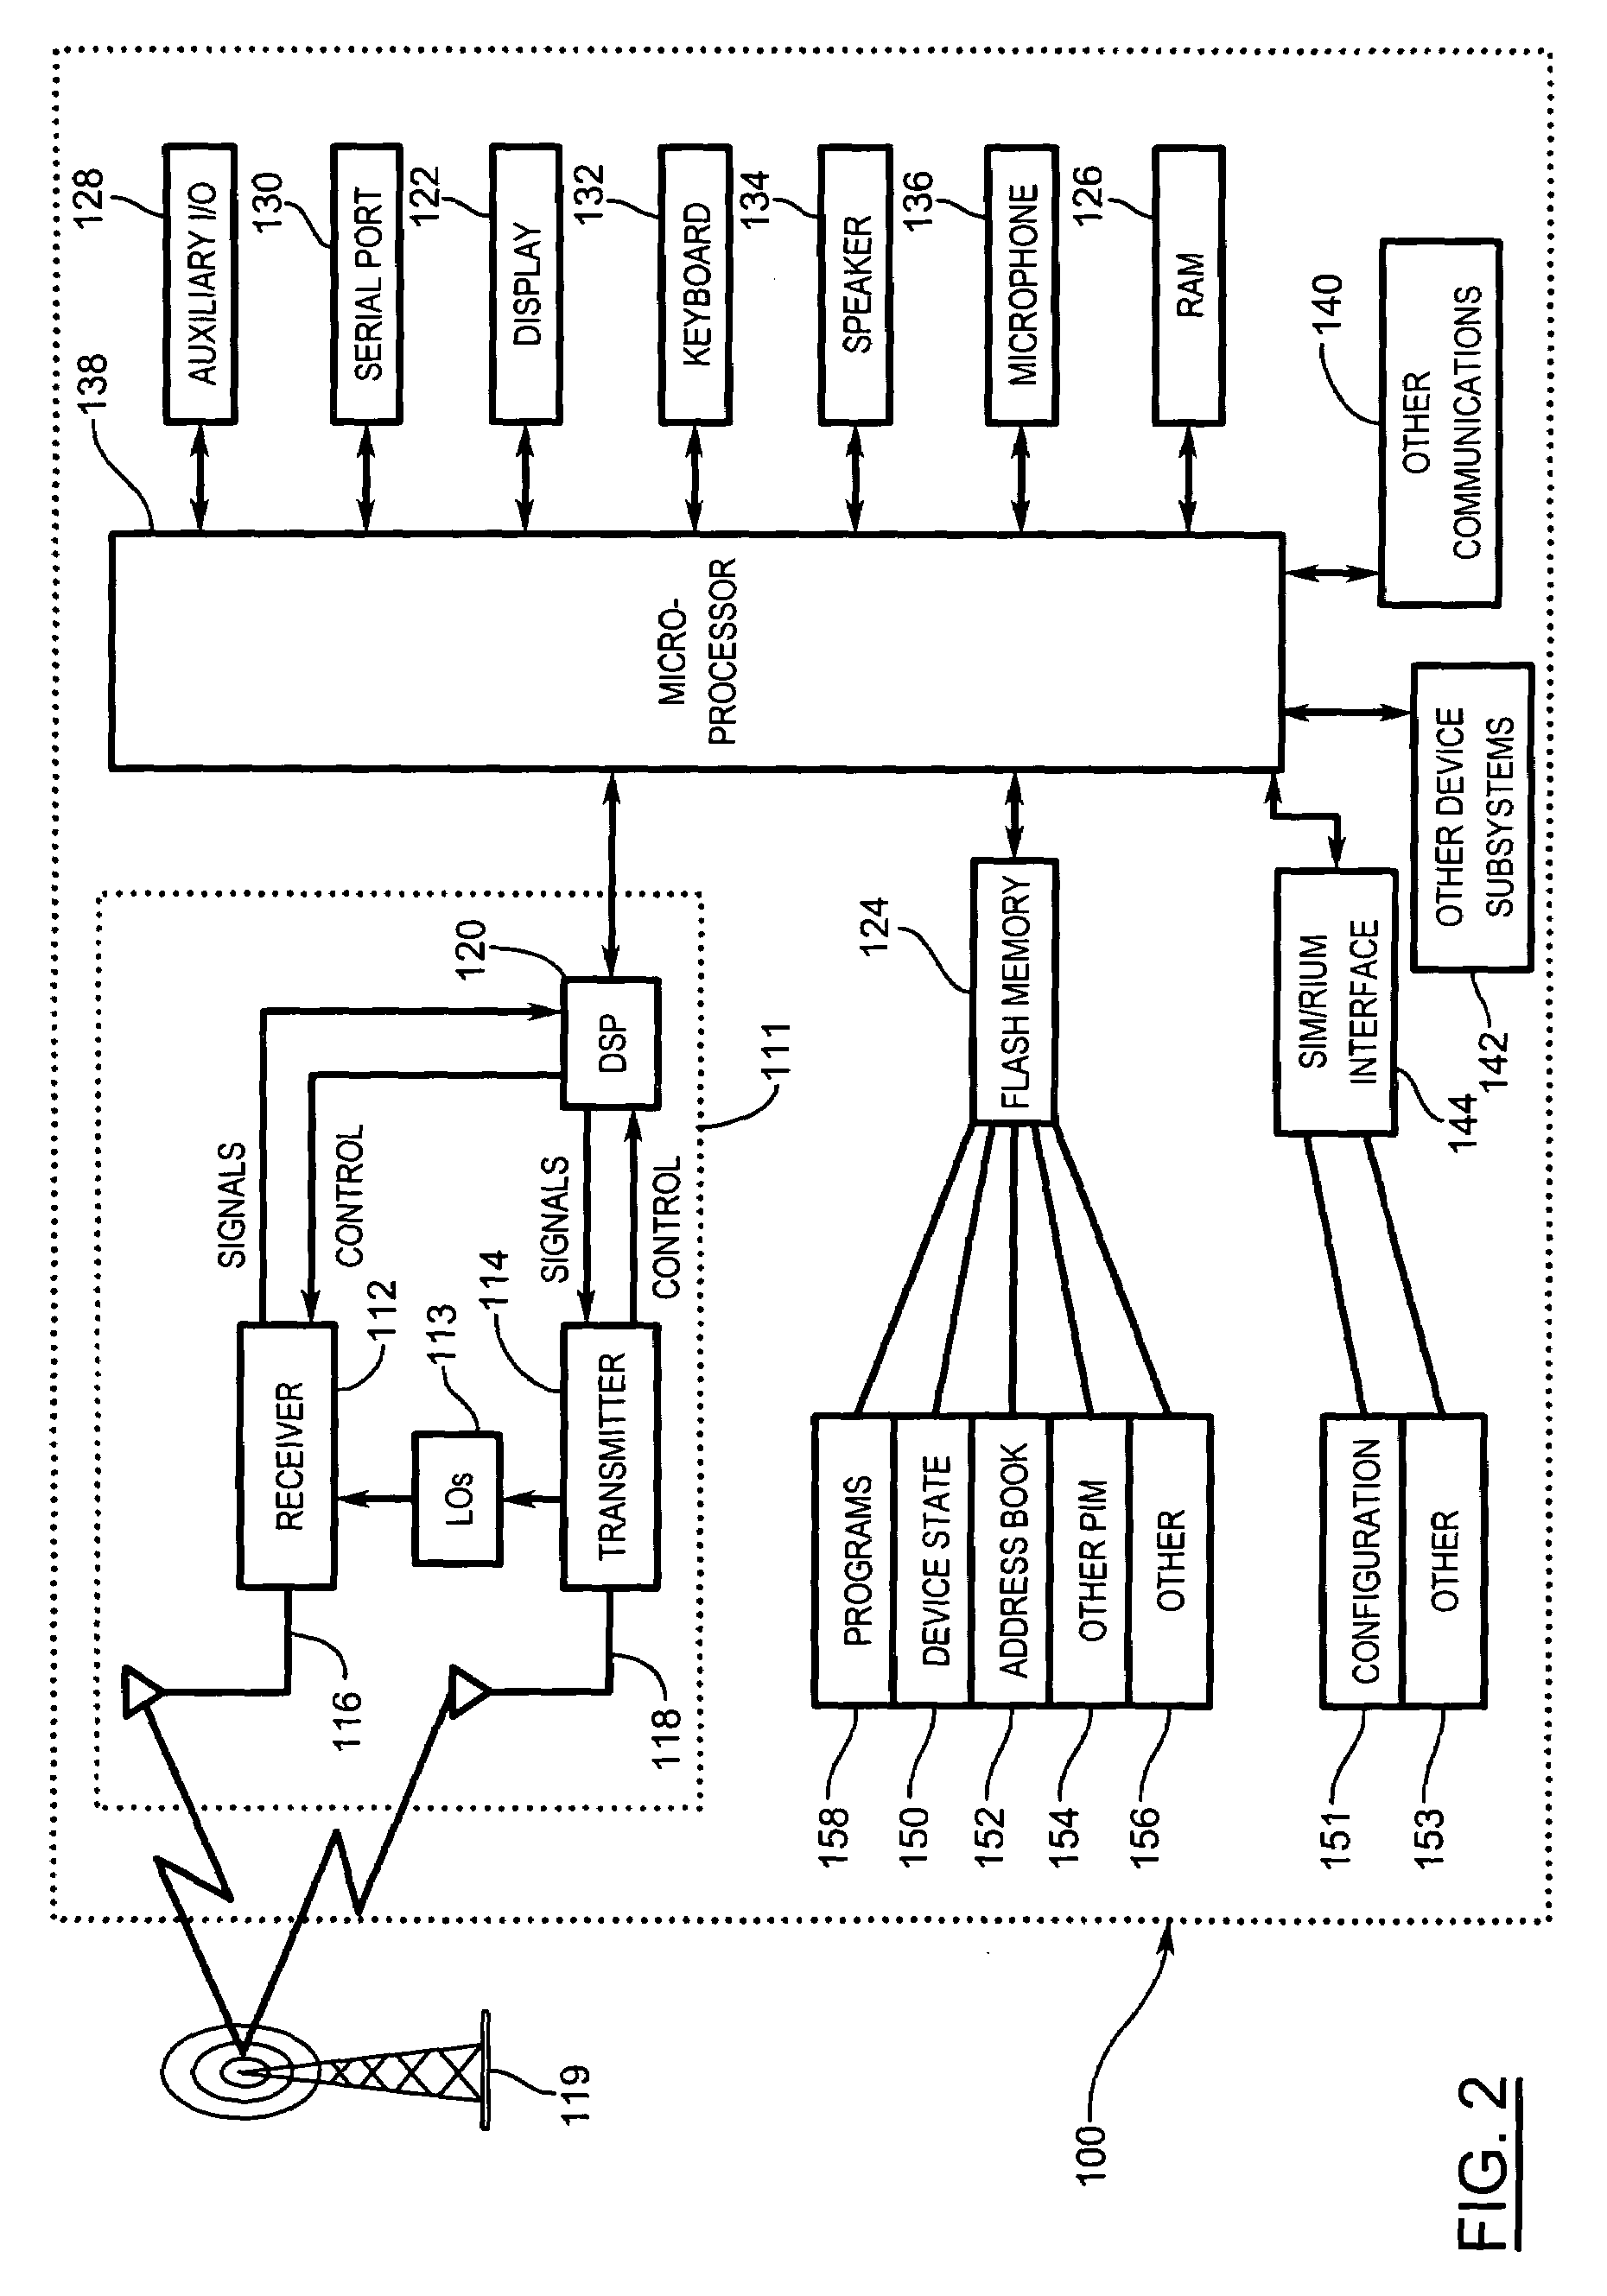 Auto-configuration of hardware on a portable computing device